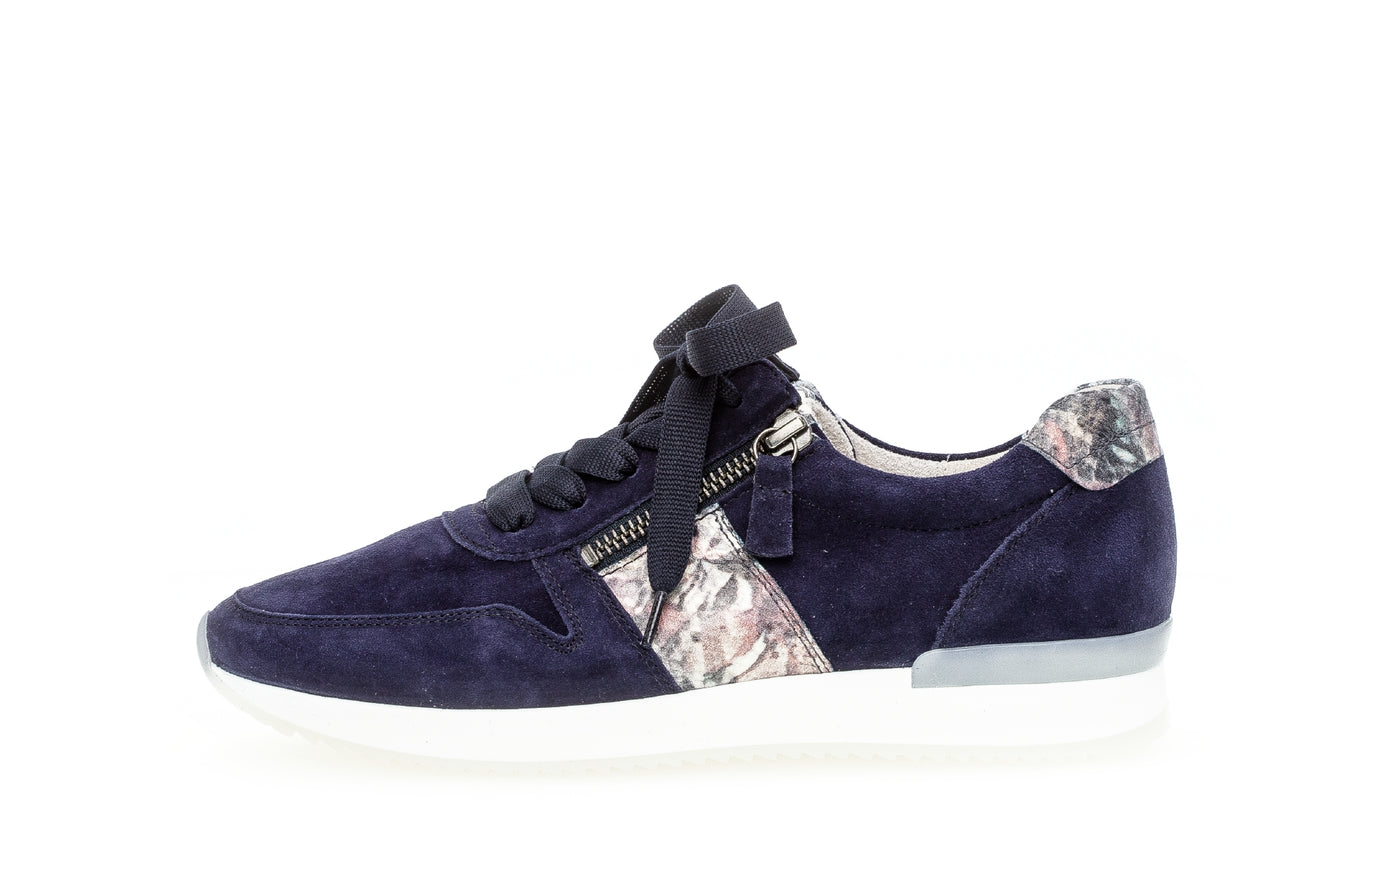 GABOR - 43.420.16 LACED FASHION SHOE - NAVY SUEDE